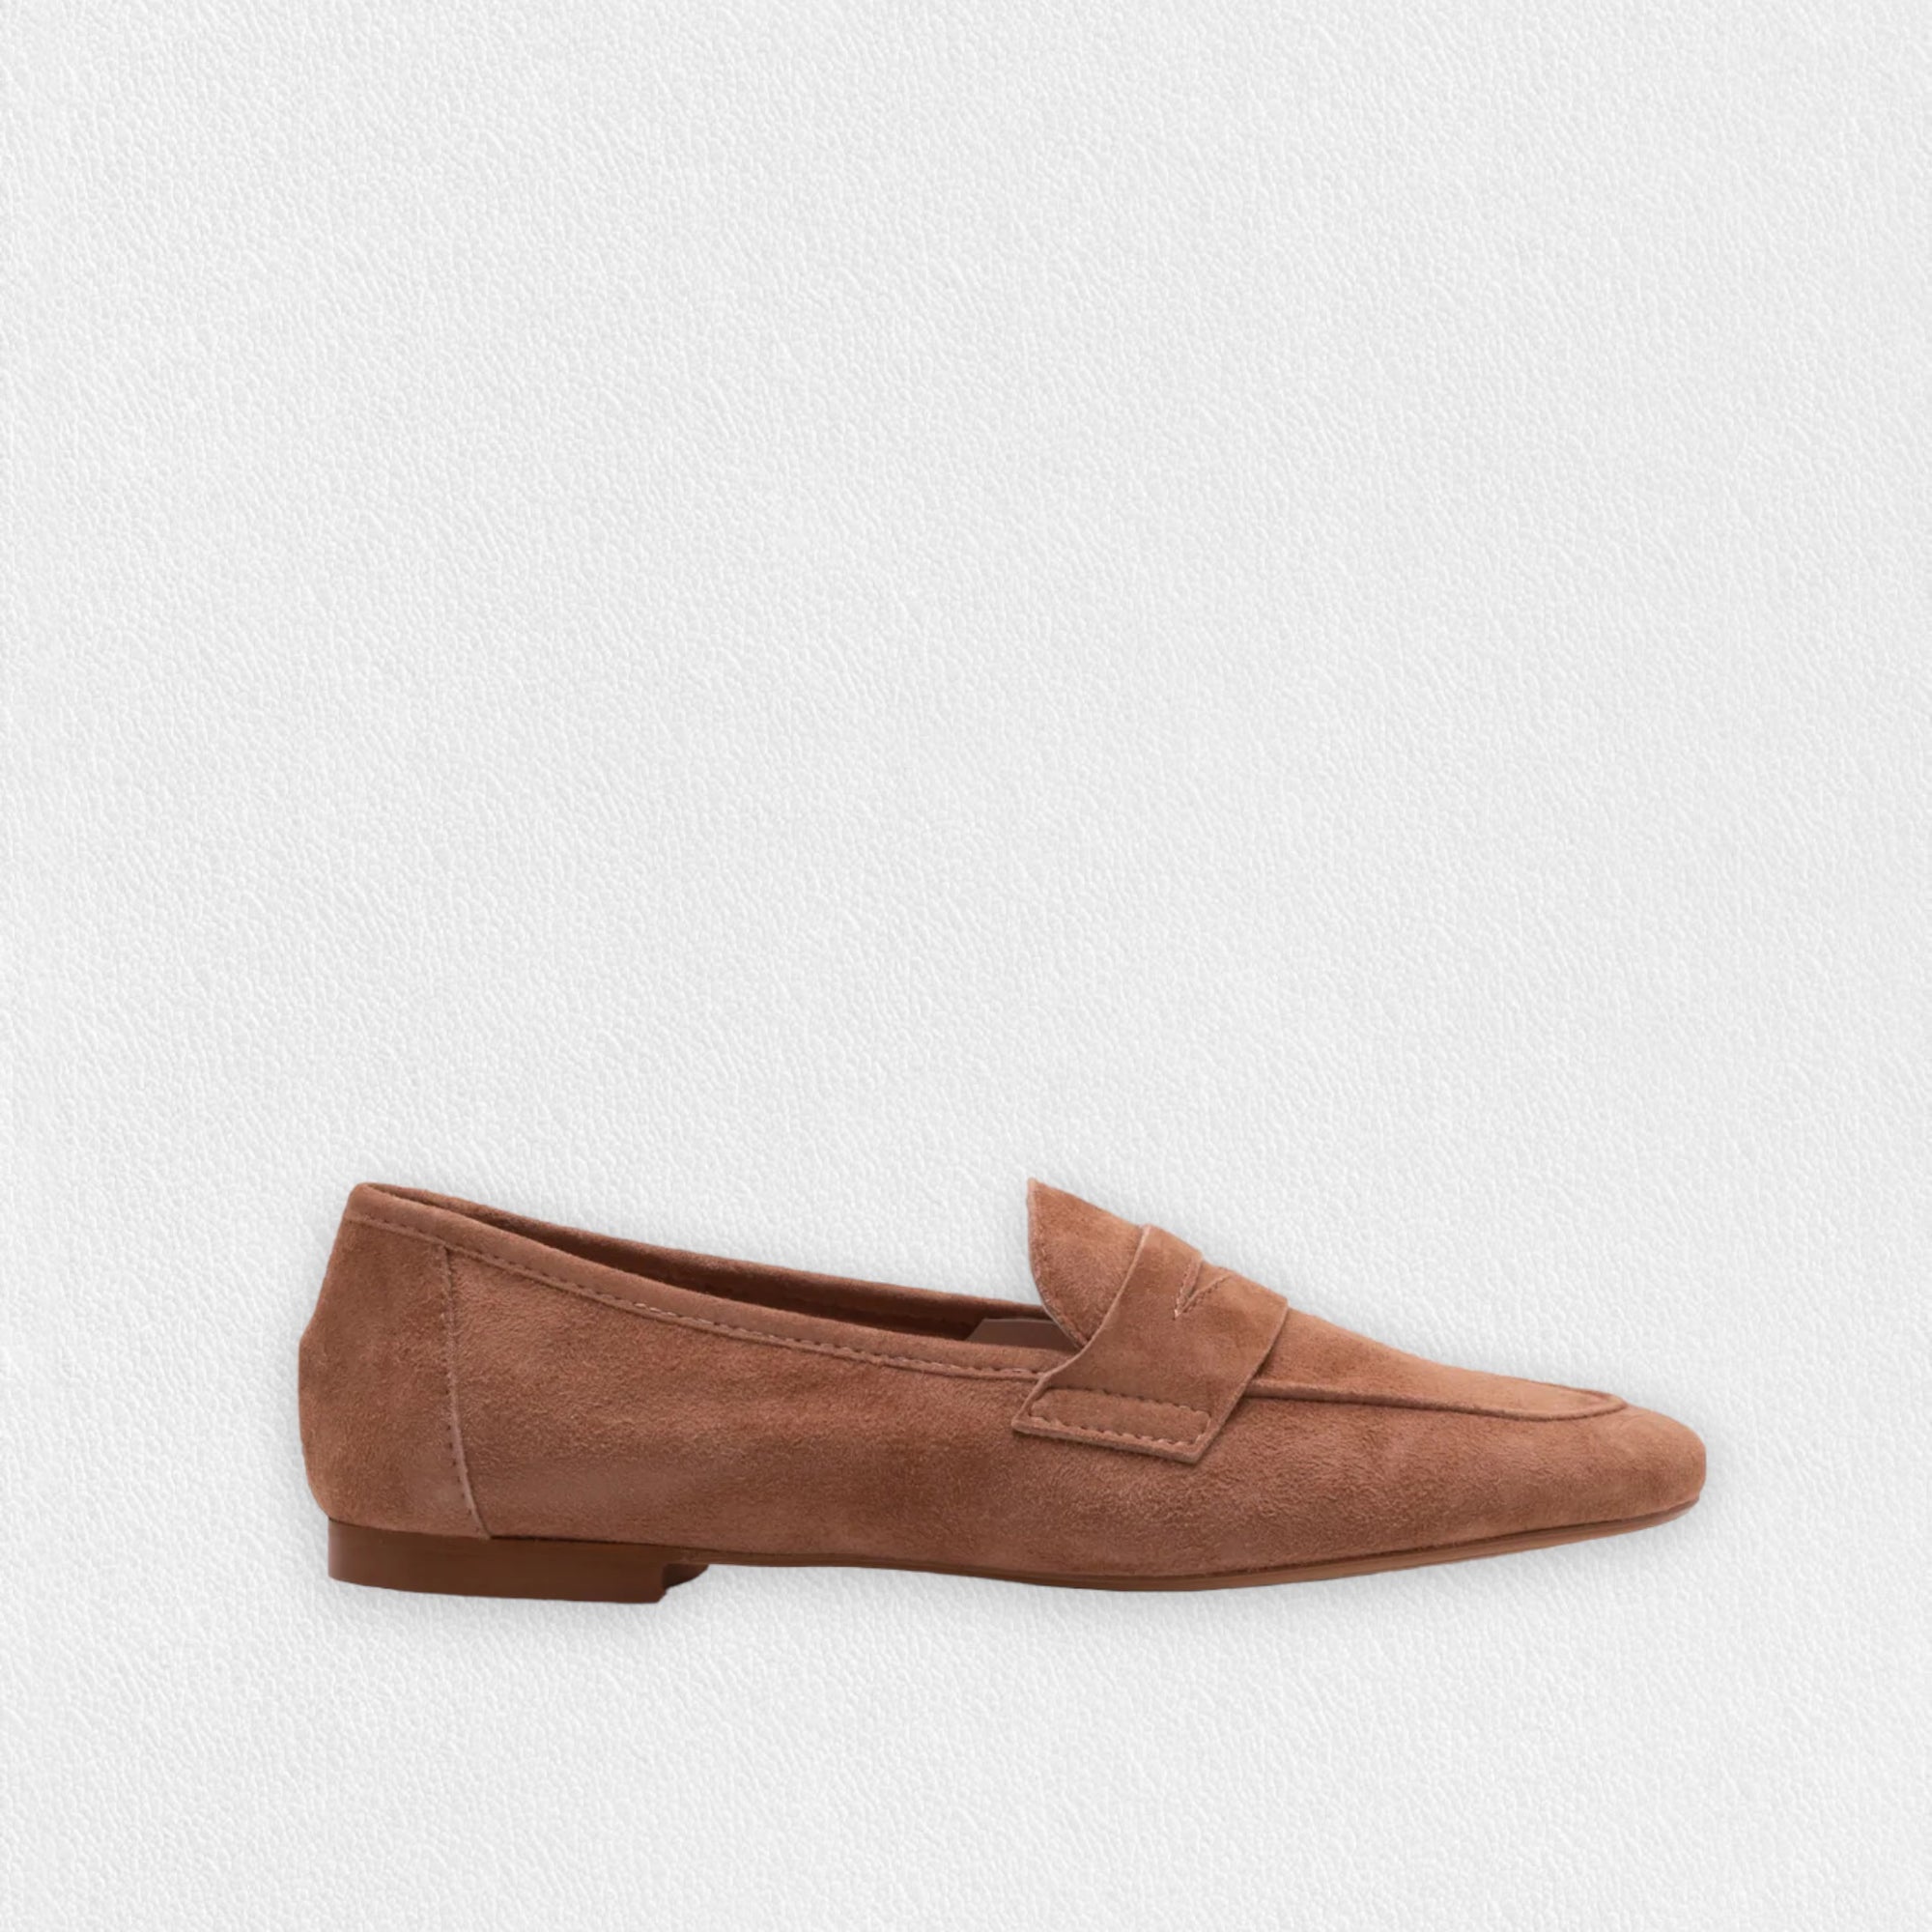 MICHELE LOPRIORE - PAOLA SUEDE LOAFER